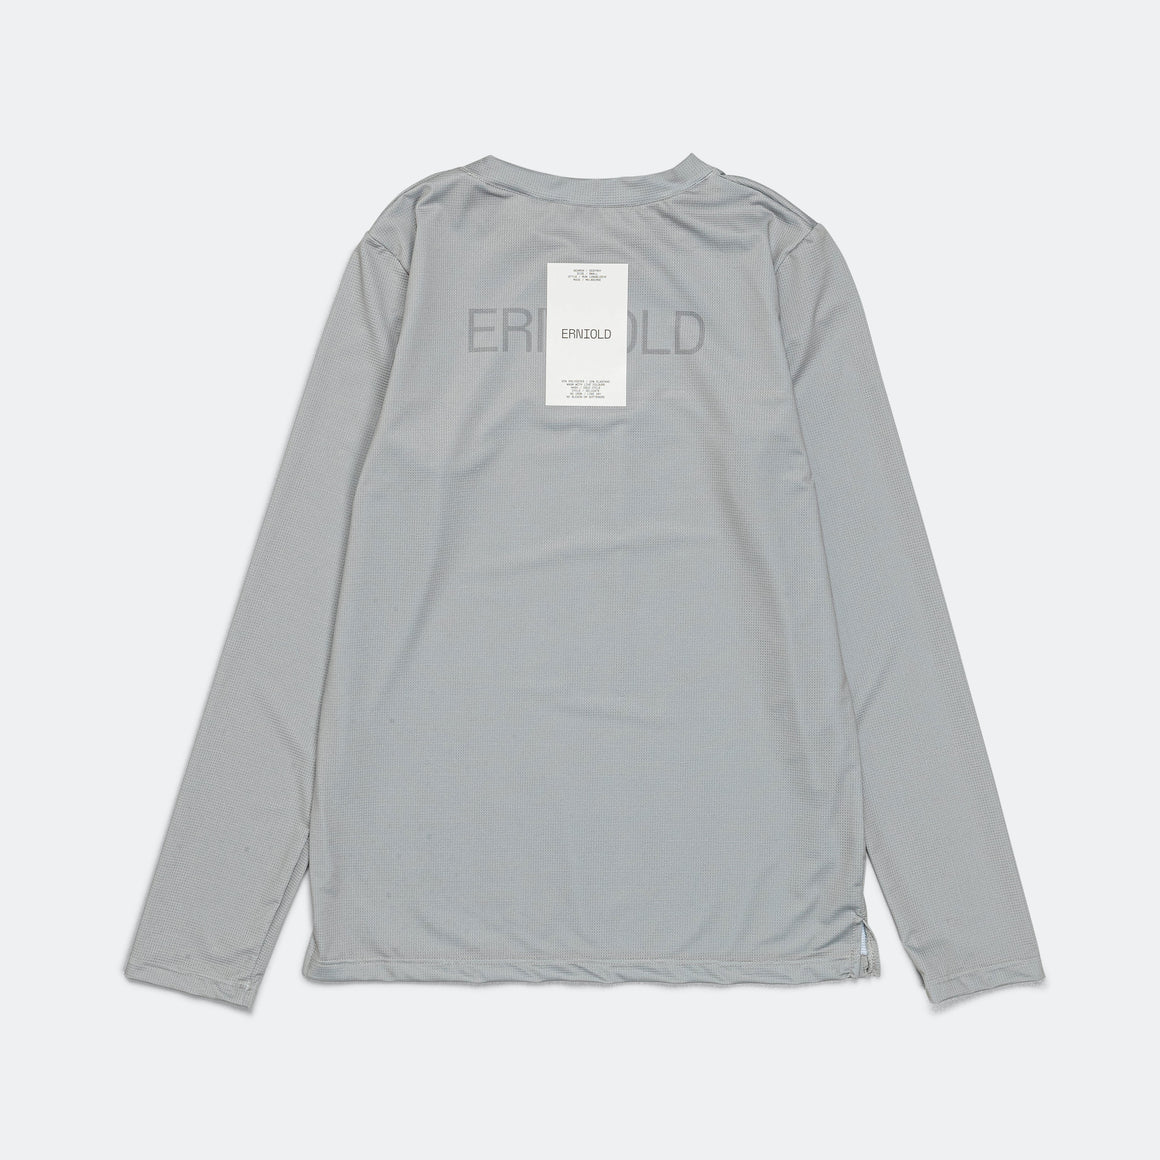 Erniold - Womens LS Run Tee - Fog - Up There Athletics